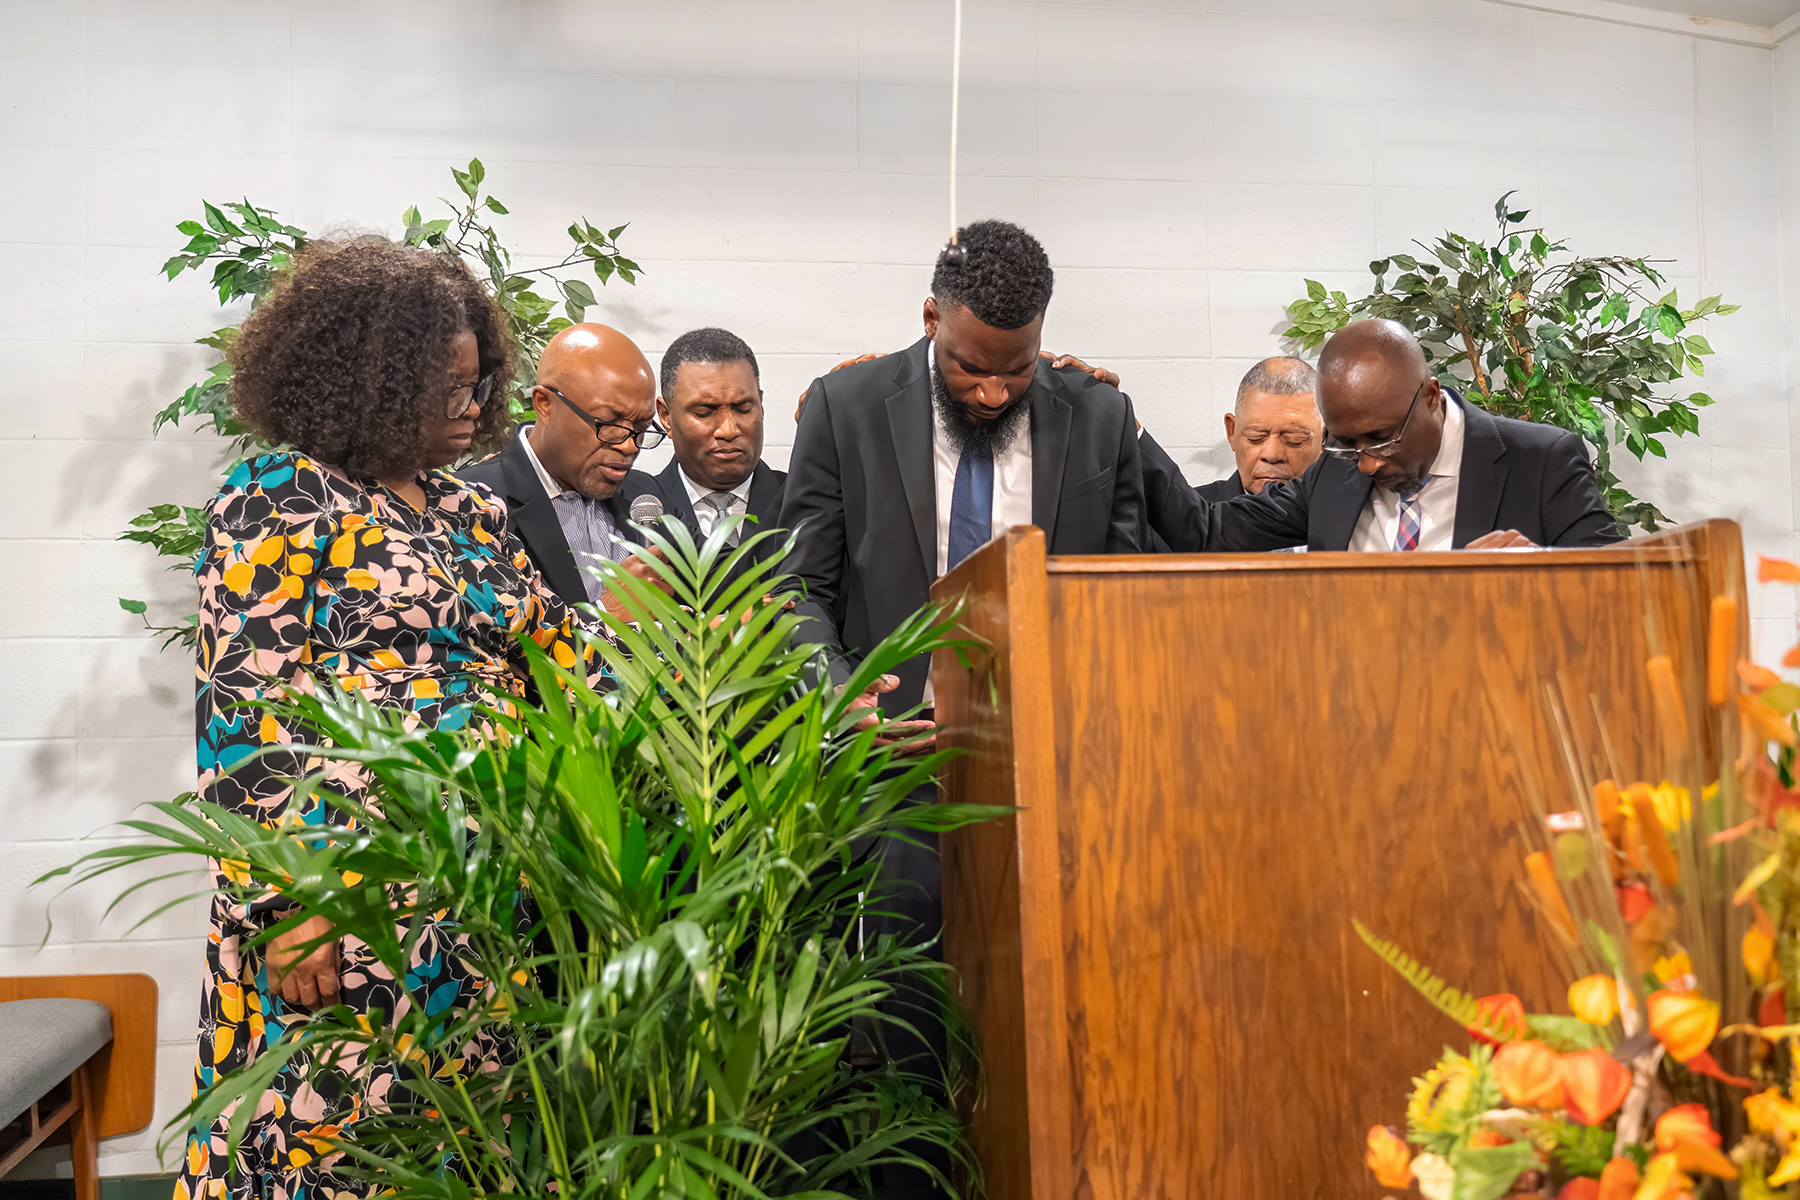 Photo of several men and a woman on a church pulpit, praying over the pastor in the middle.